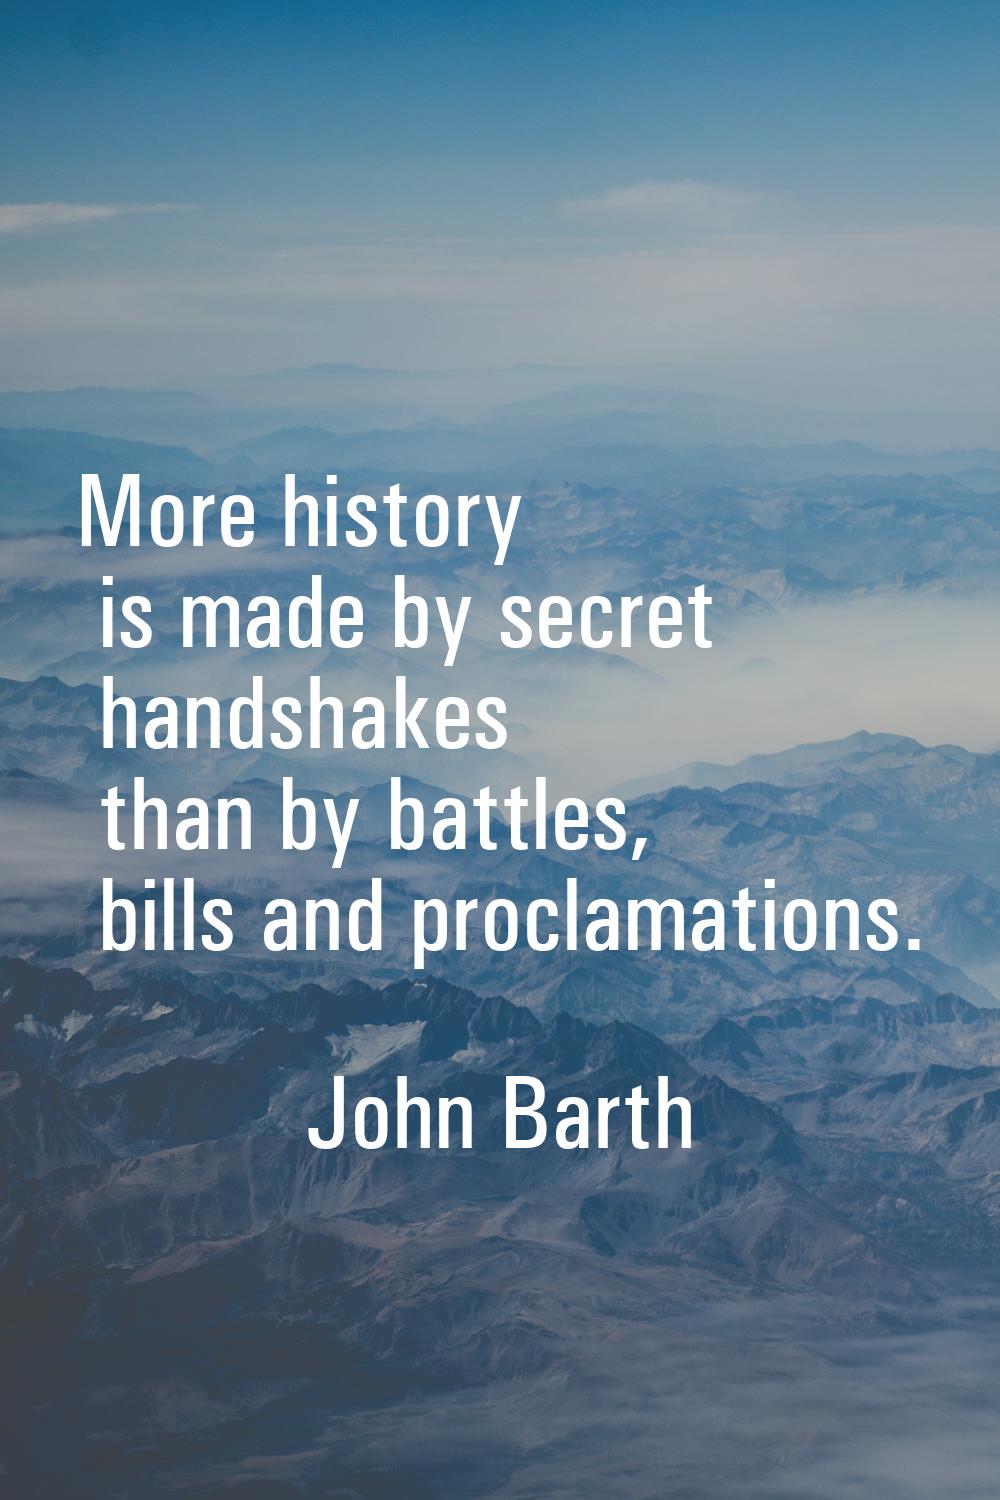 More history is made by secret handshakes than by battles, bills and proclamations.